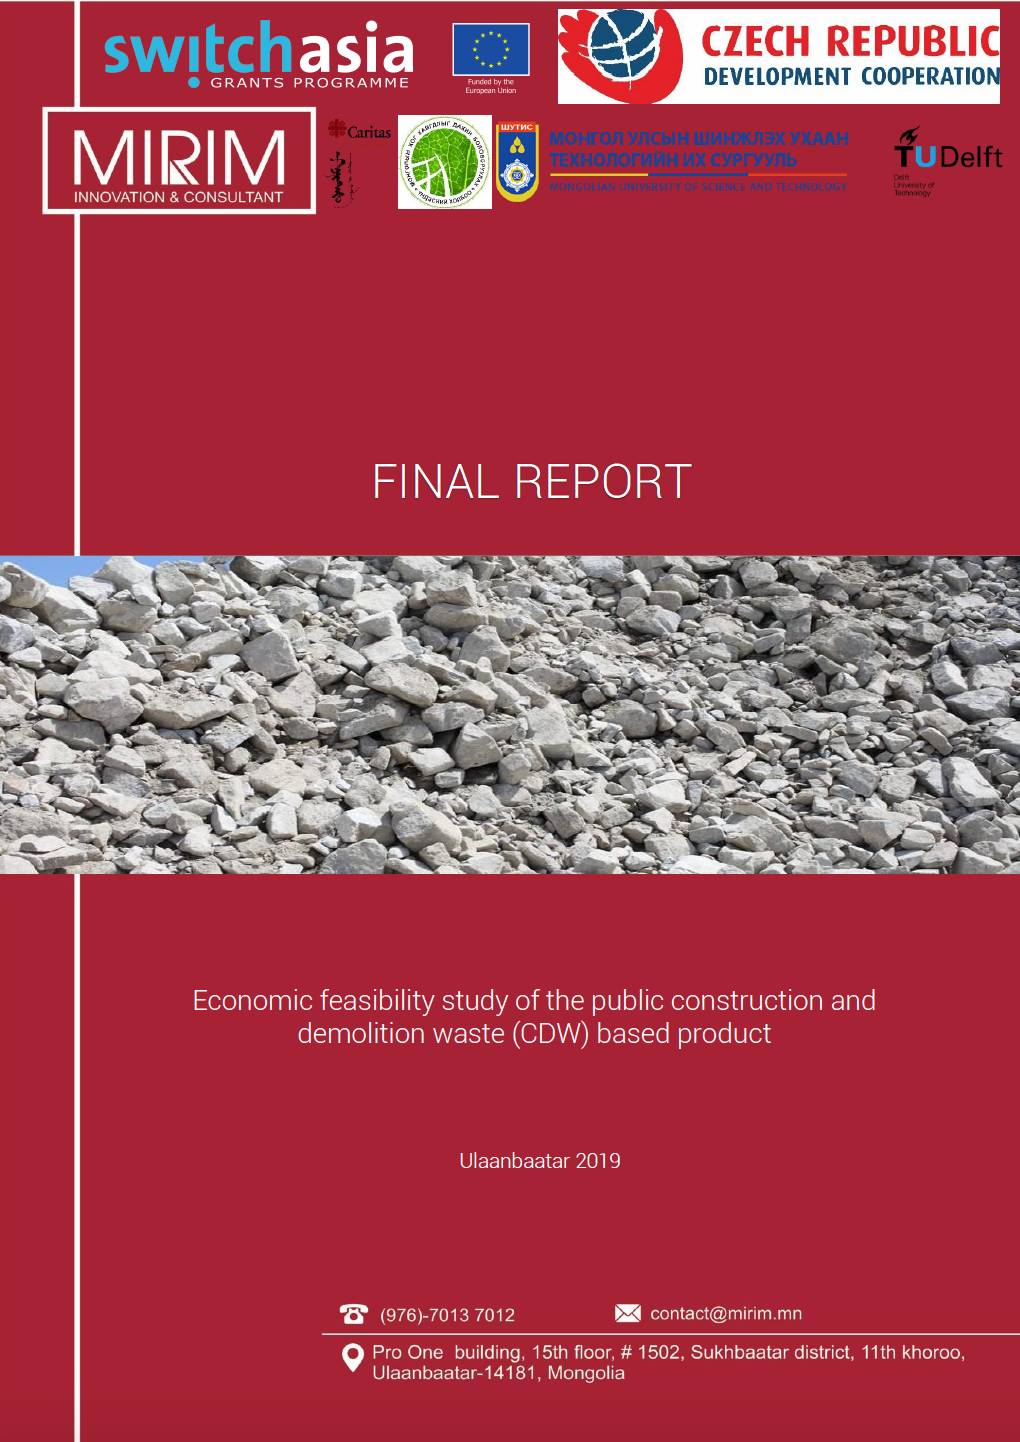 Economic feasibility study of the public construction and demolition waste (CDW) based product